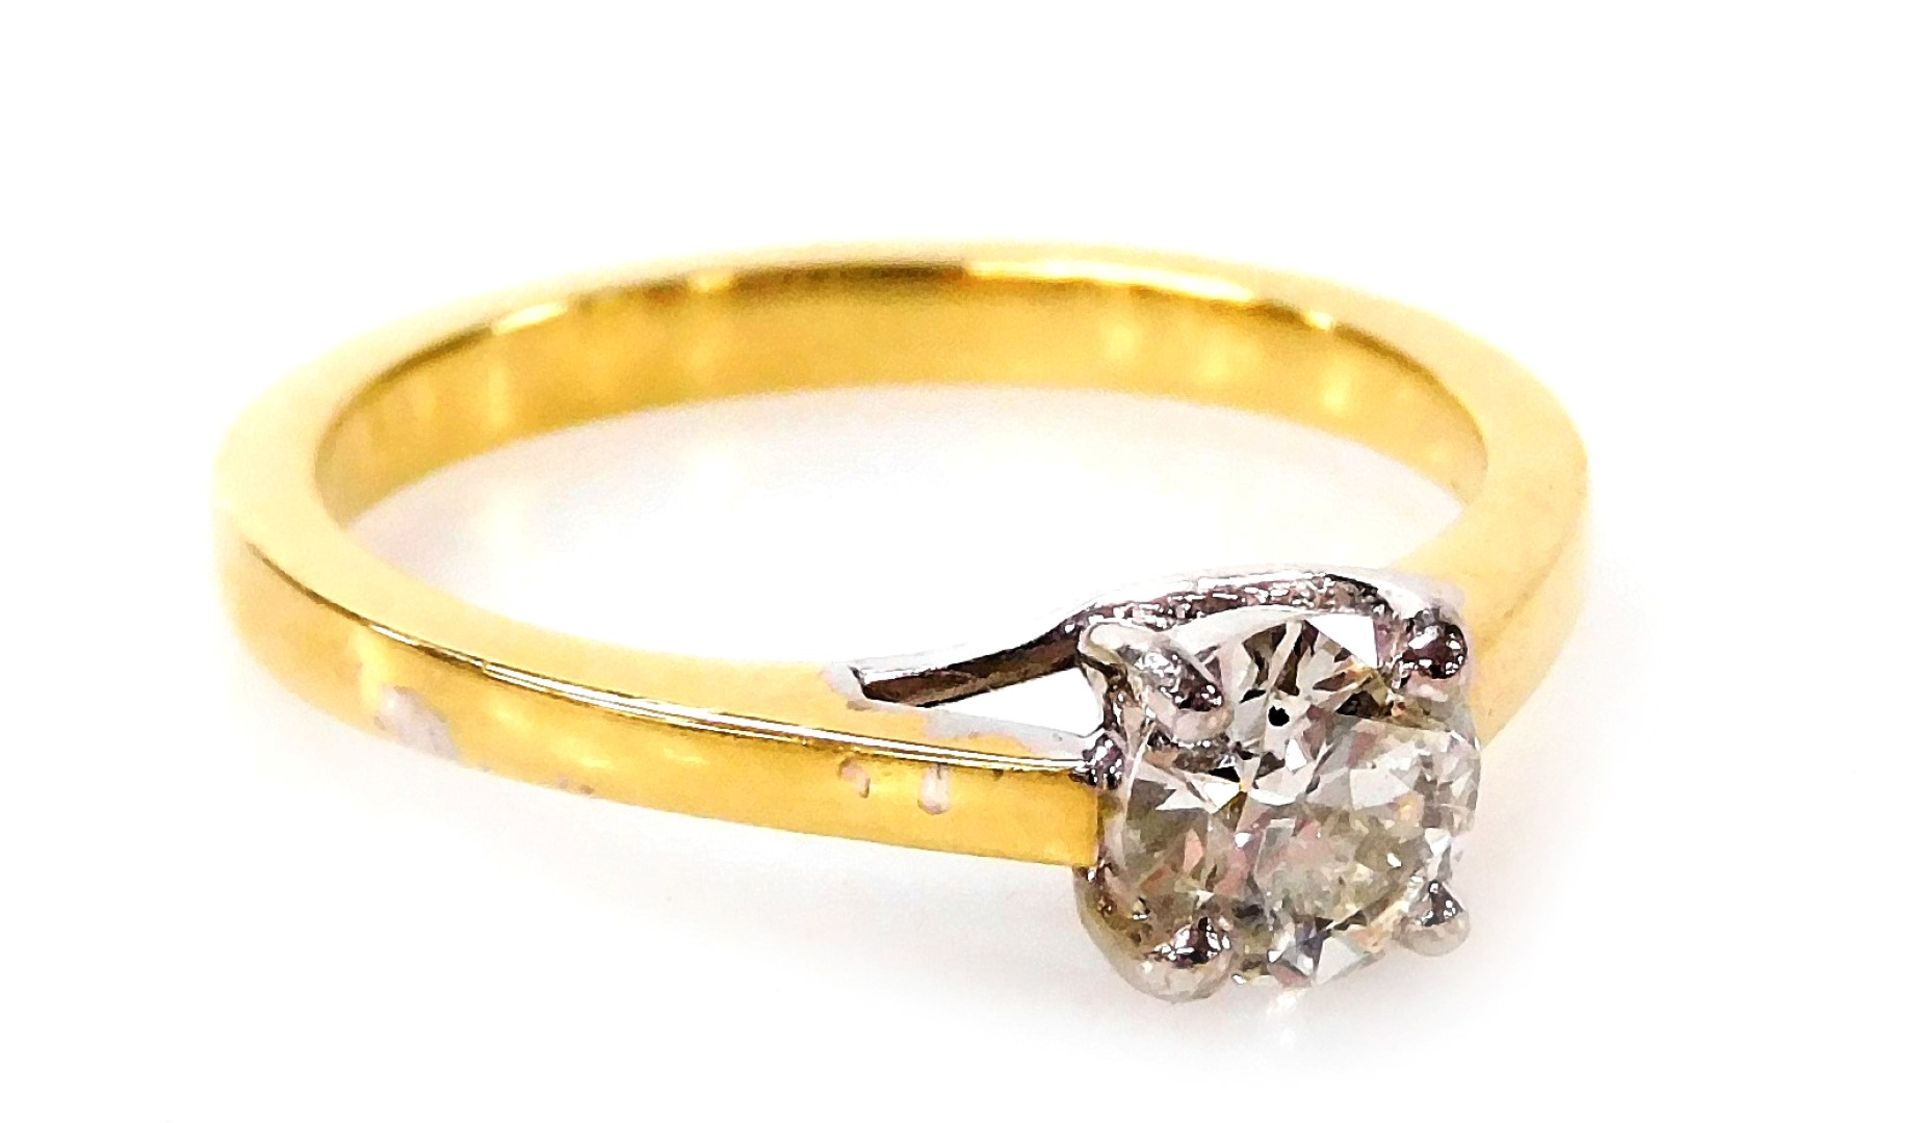 An 18ct gold and diamond solitaire ring, with round brilliant cut diamond totalling 0.53ct, in a fou